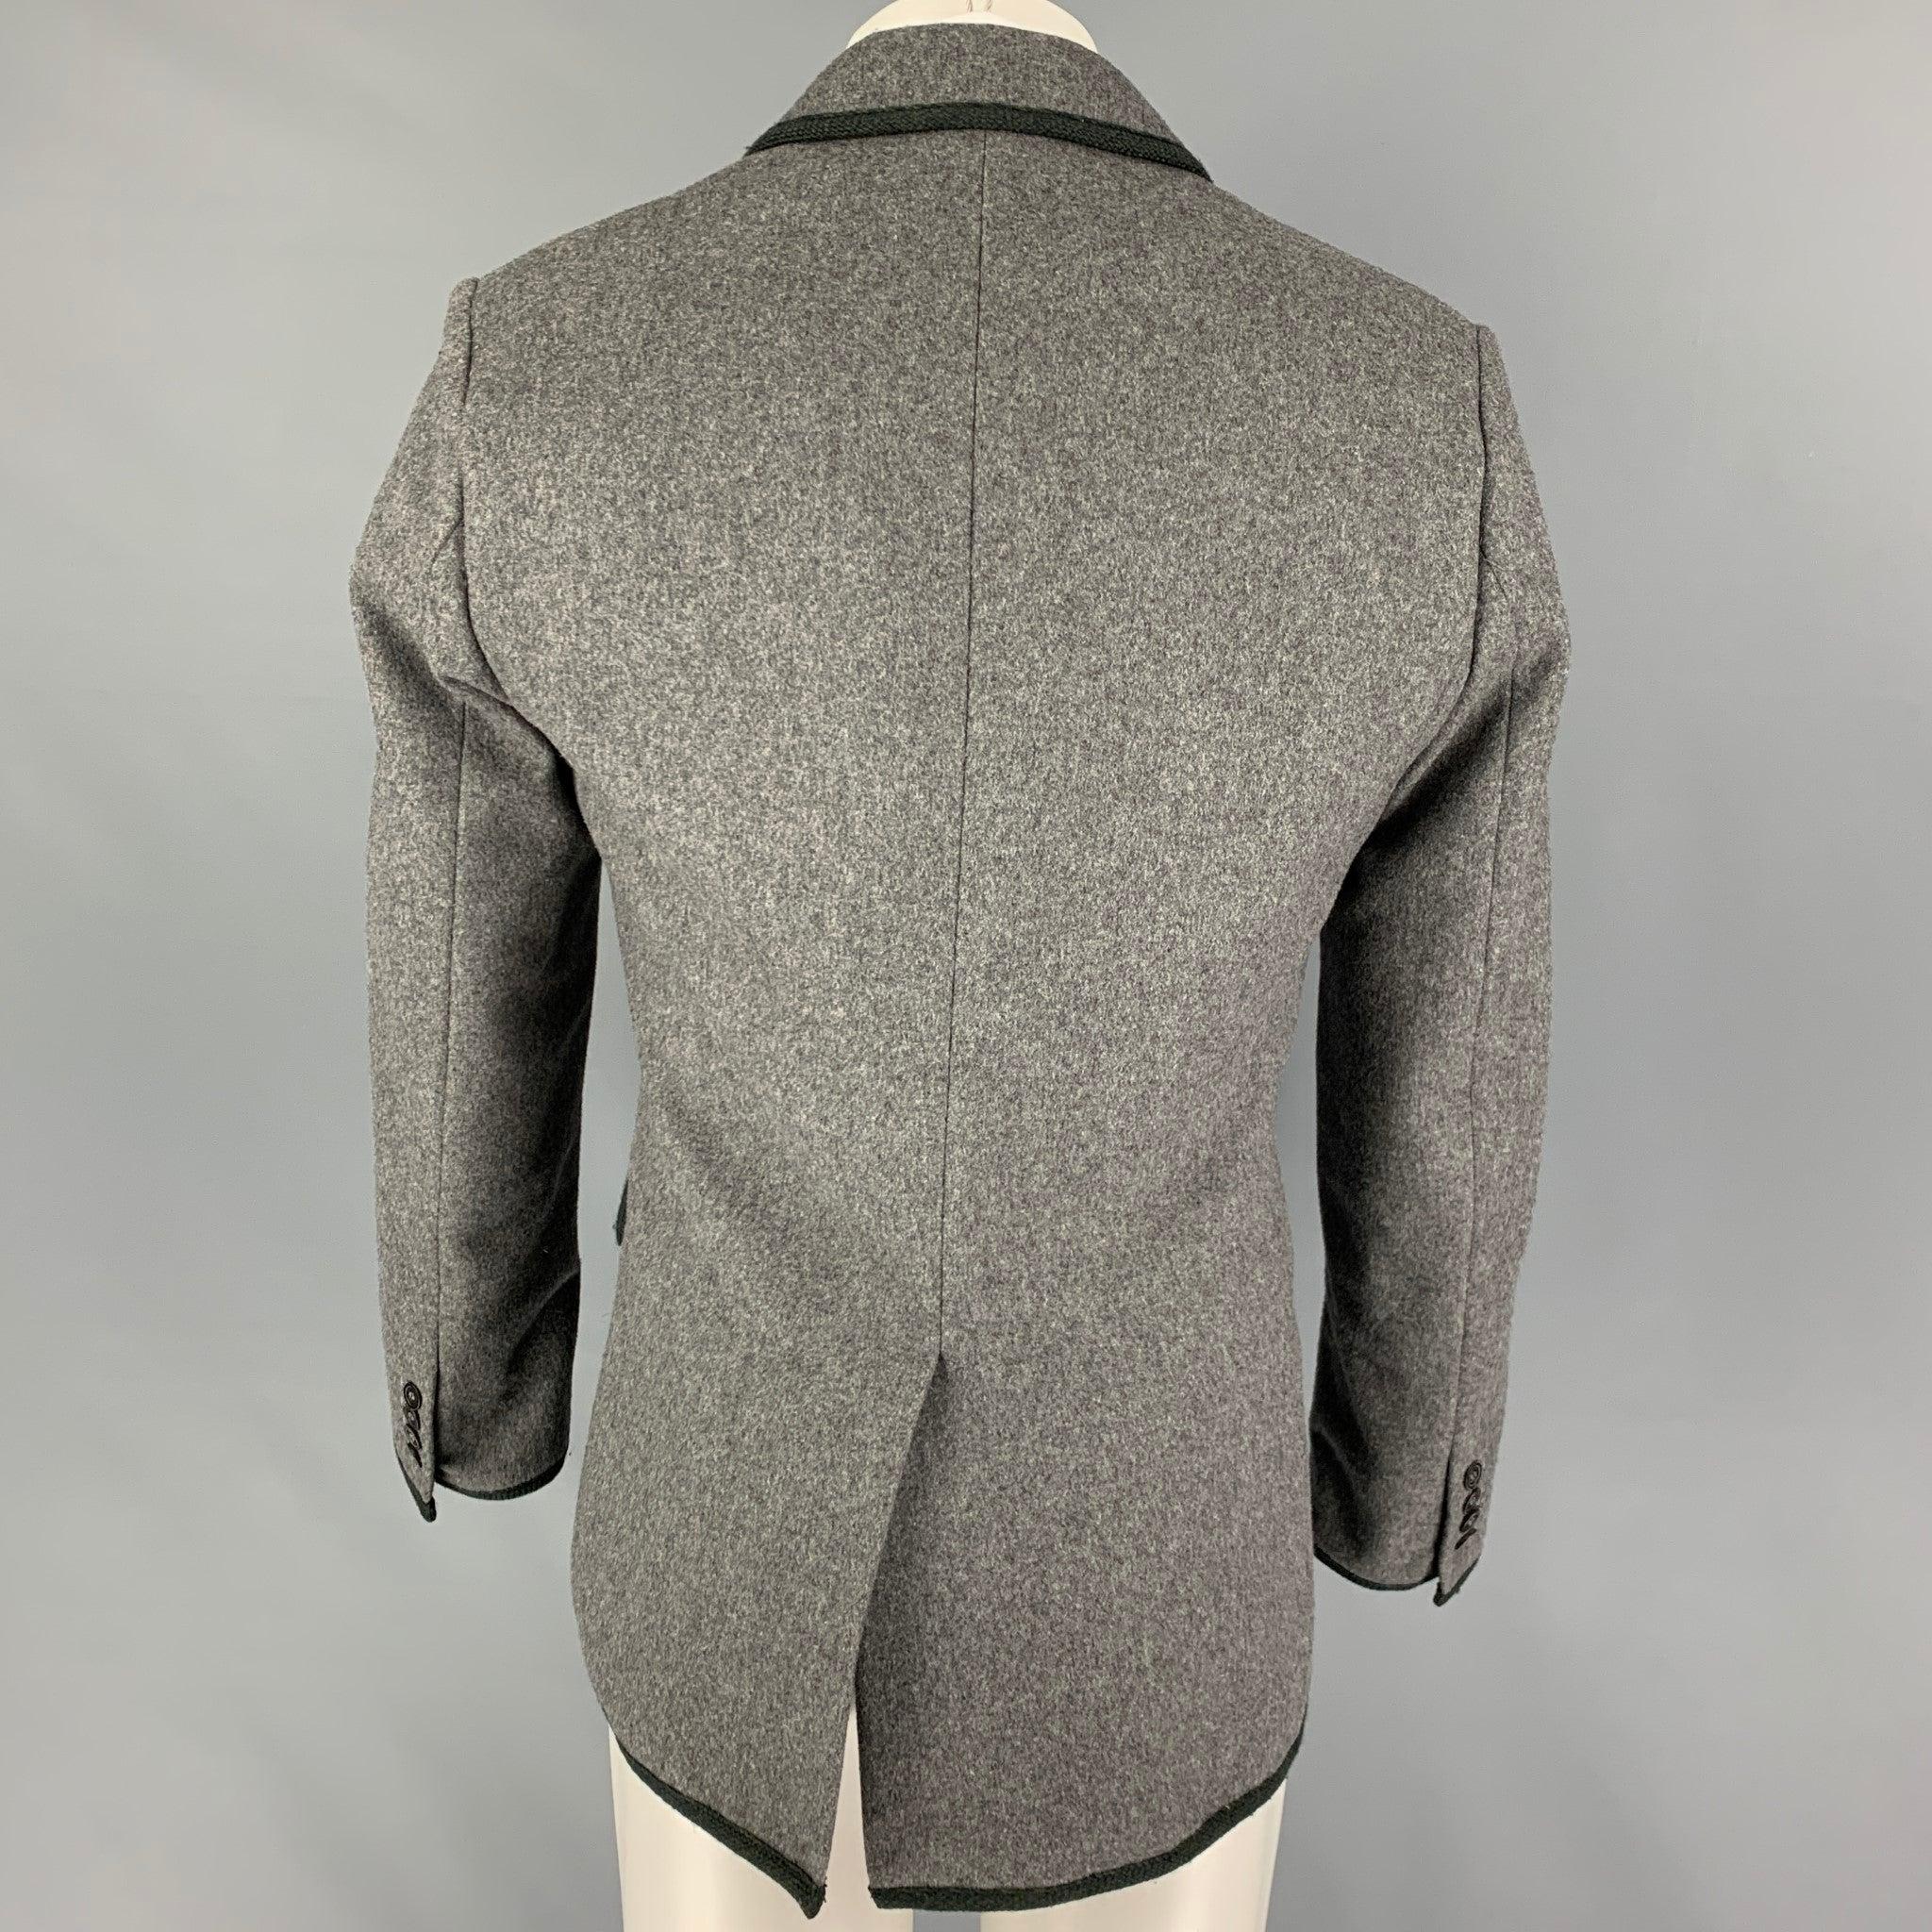 MARC by MARC JACOBS Size 38 Gray Charcoal Wool Nylon Sport Coat In Good Condition For Sale In San Francisco, CA